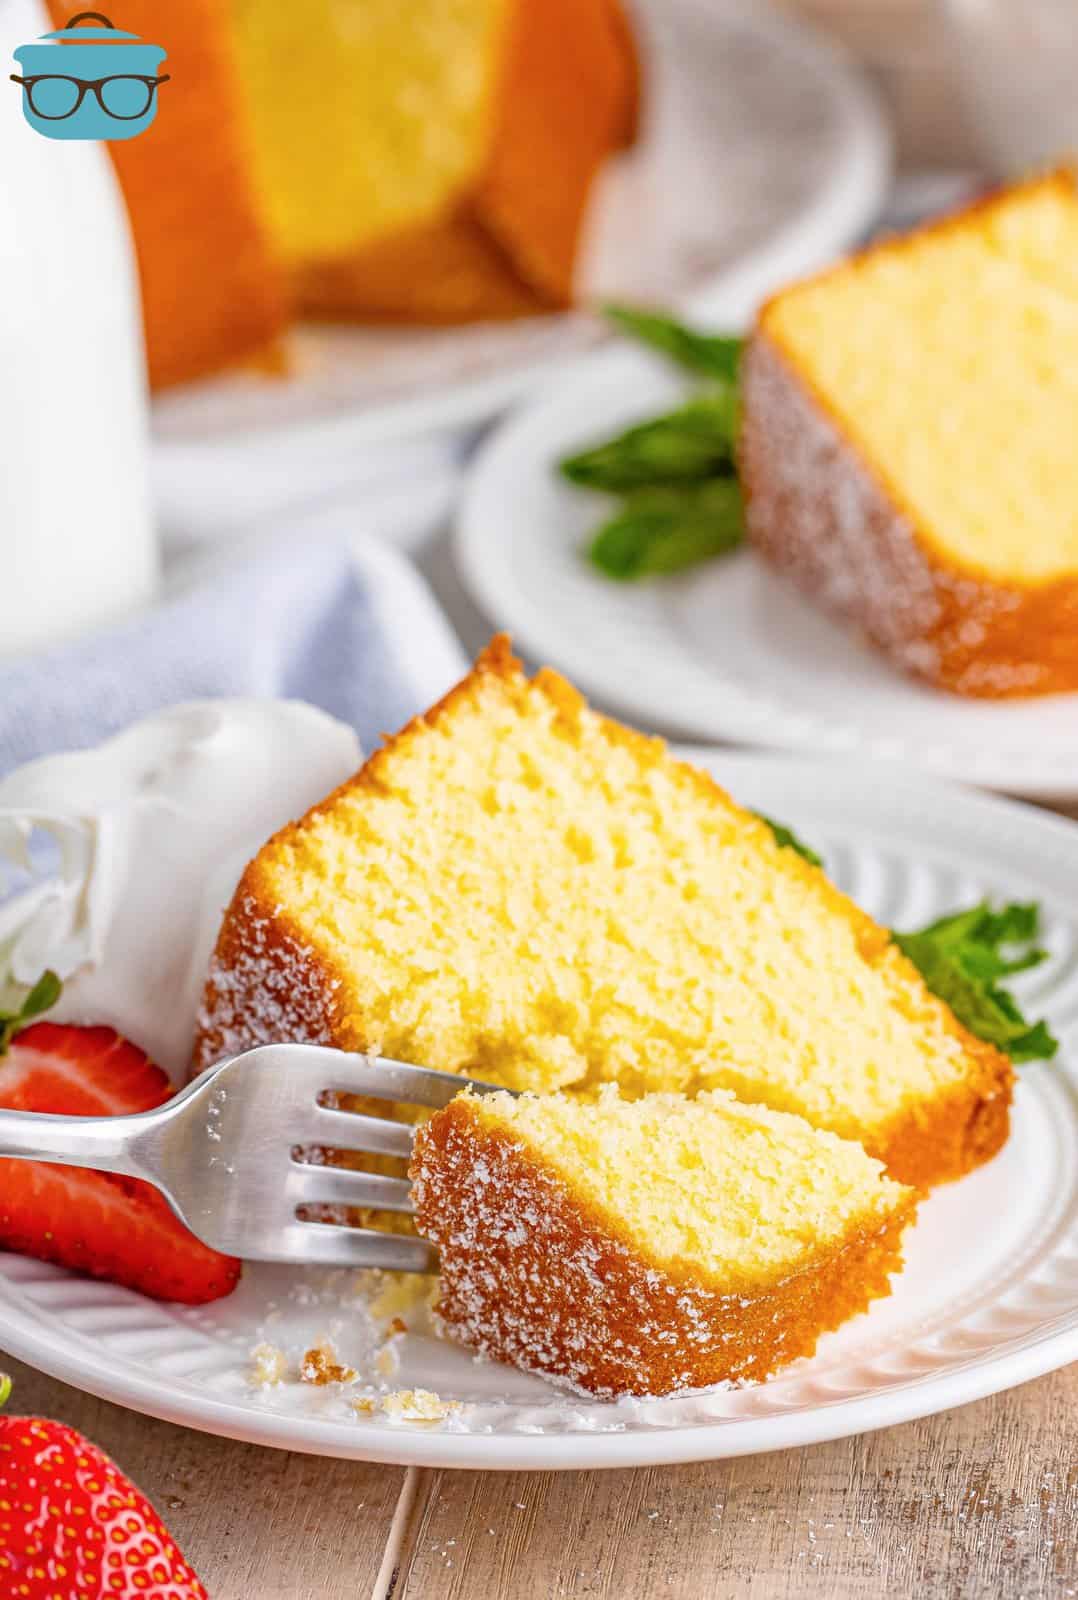 A slice of Southern Pound Cake on a plate and a fork removing a bite.